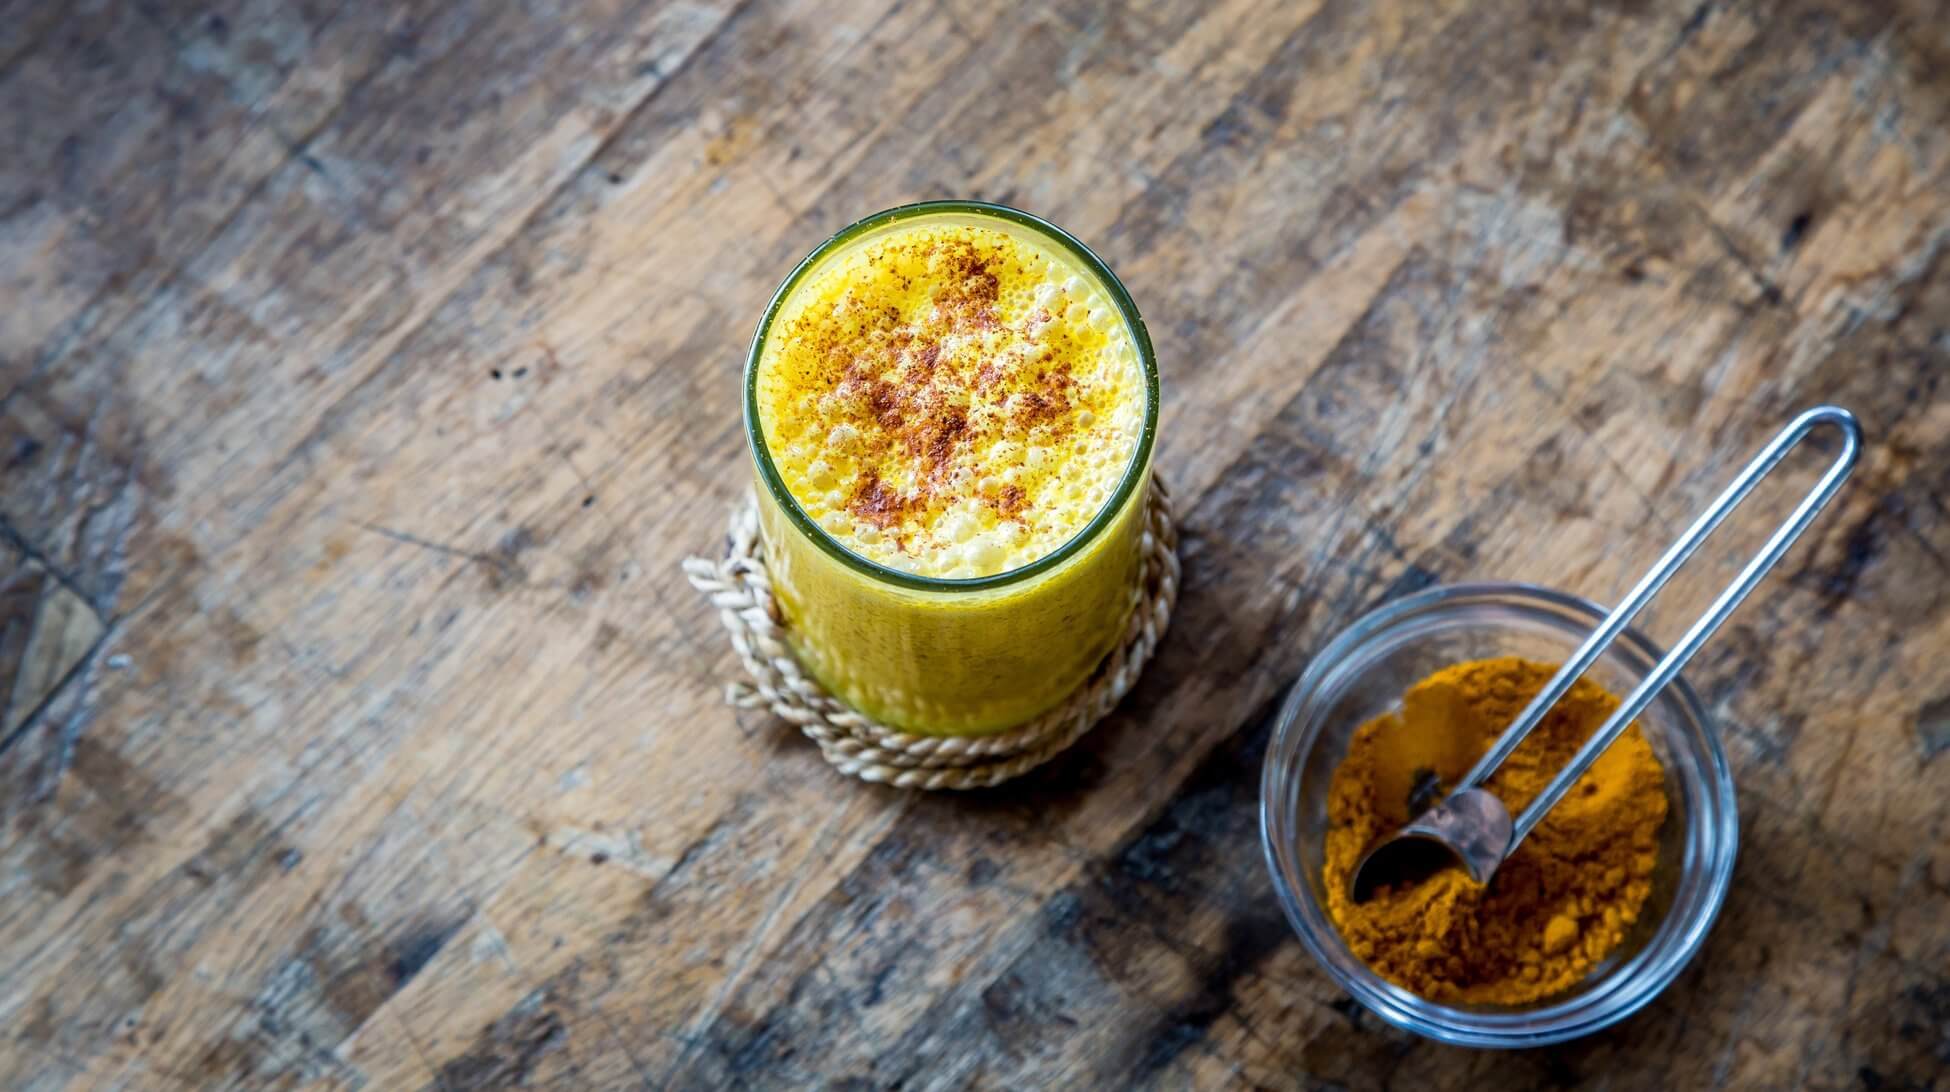 4 ways to cook with turmeric this Christmas